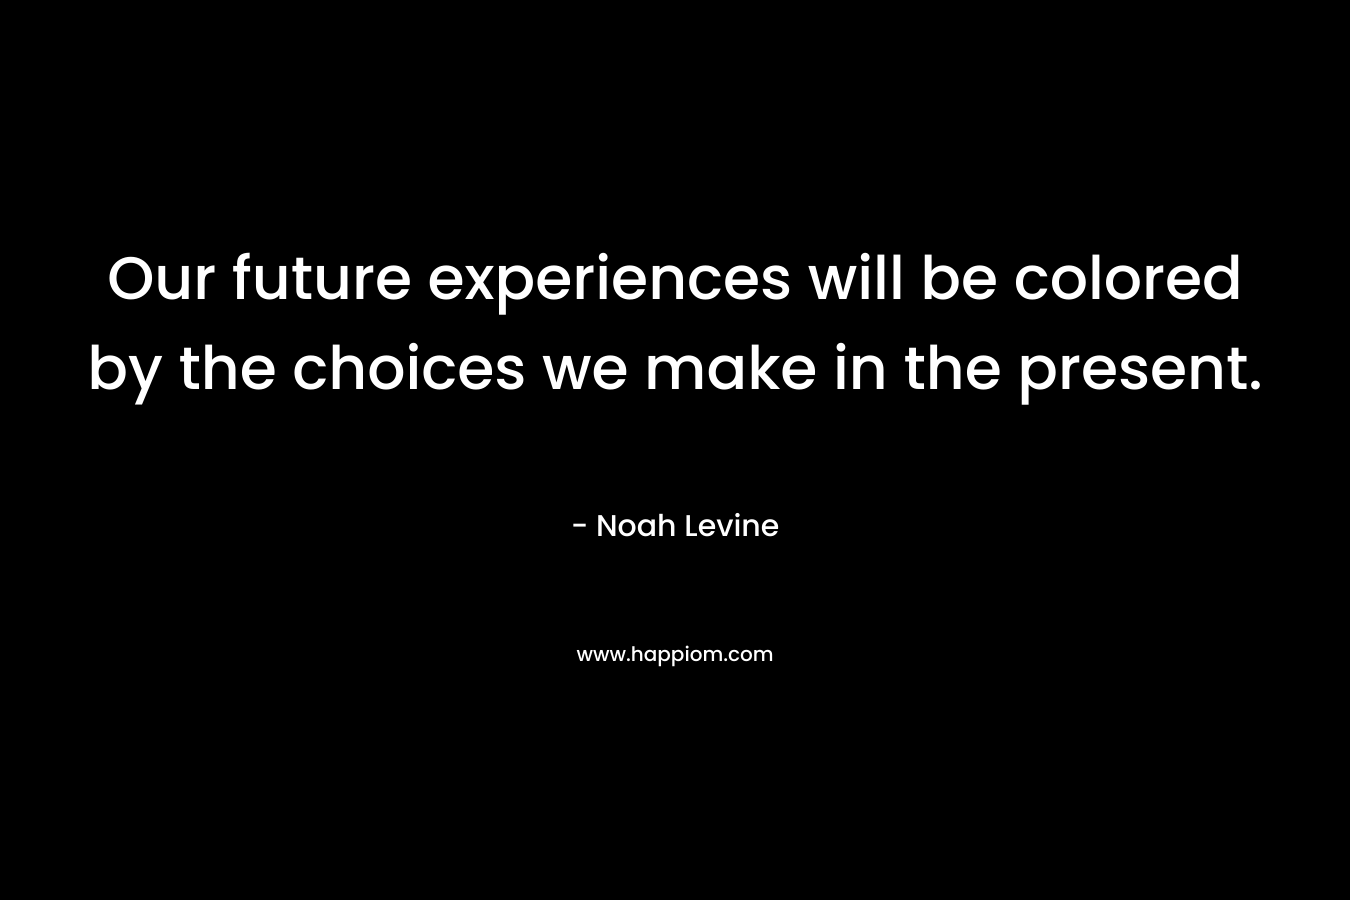 Our future experiences will be colored by the choices we make in the present.